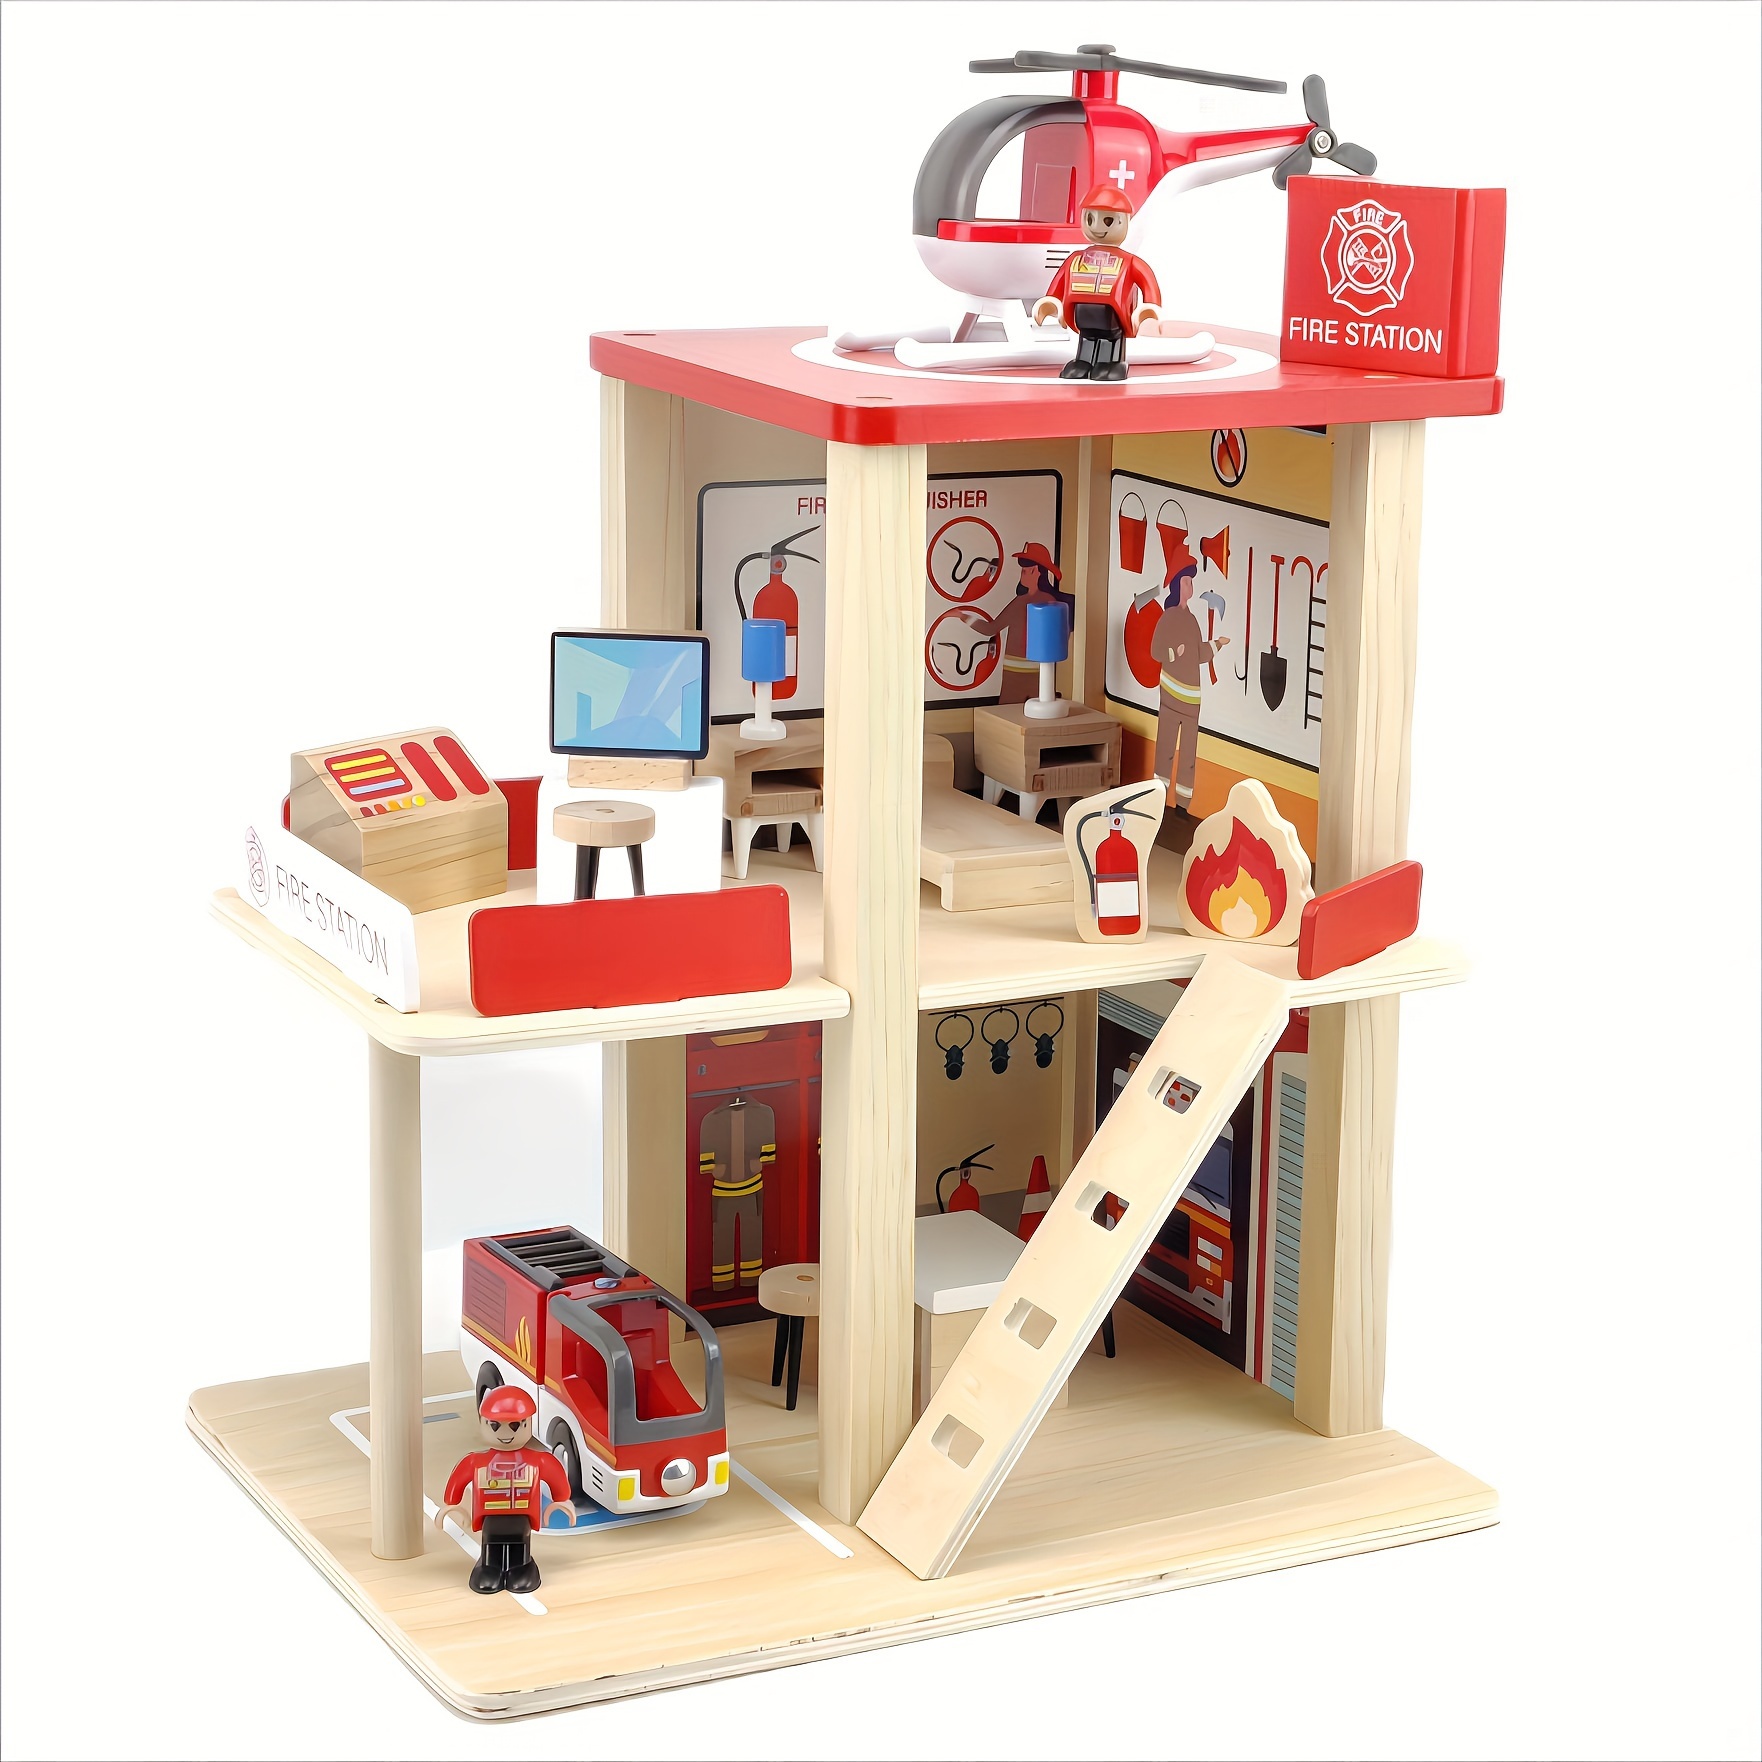 

Wooden Fire Station Playset, Multicolor 3-level Pretend Play Dollhouse With Figures, Truck, Helicopter And Accessories, Preschool Learning Educational Toys For Toddlers Kids Age 3 And Up